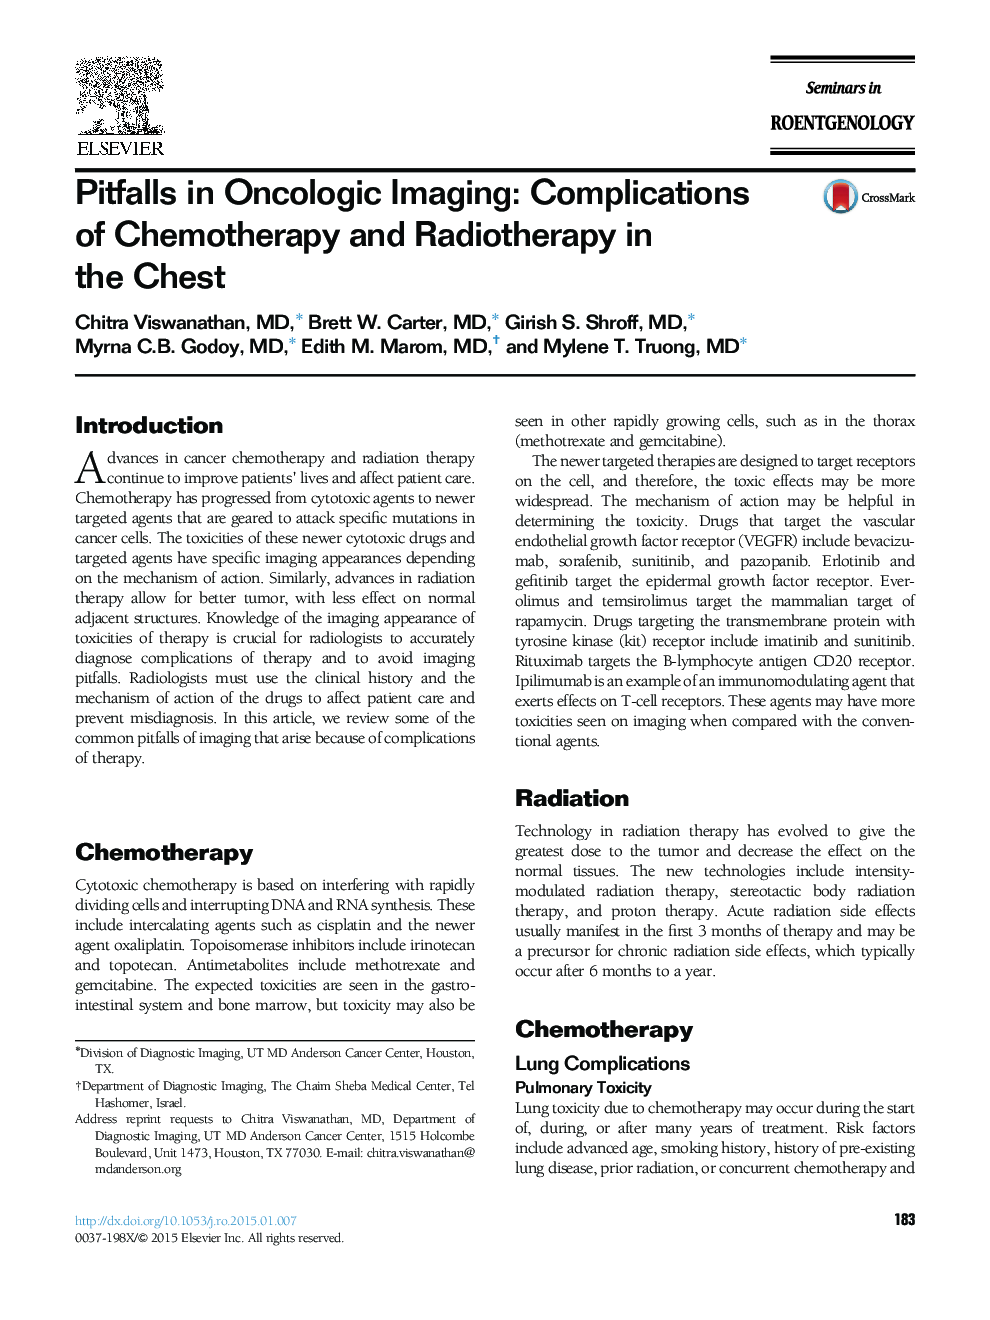 Pitfalls in Oncologic Imaging: Complications of Chemotherapy and Radiotherapy in the Chest